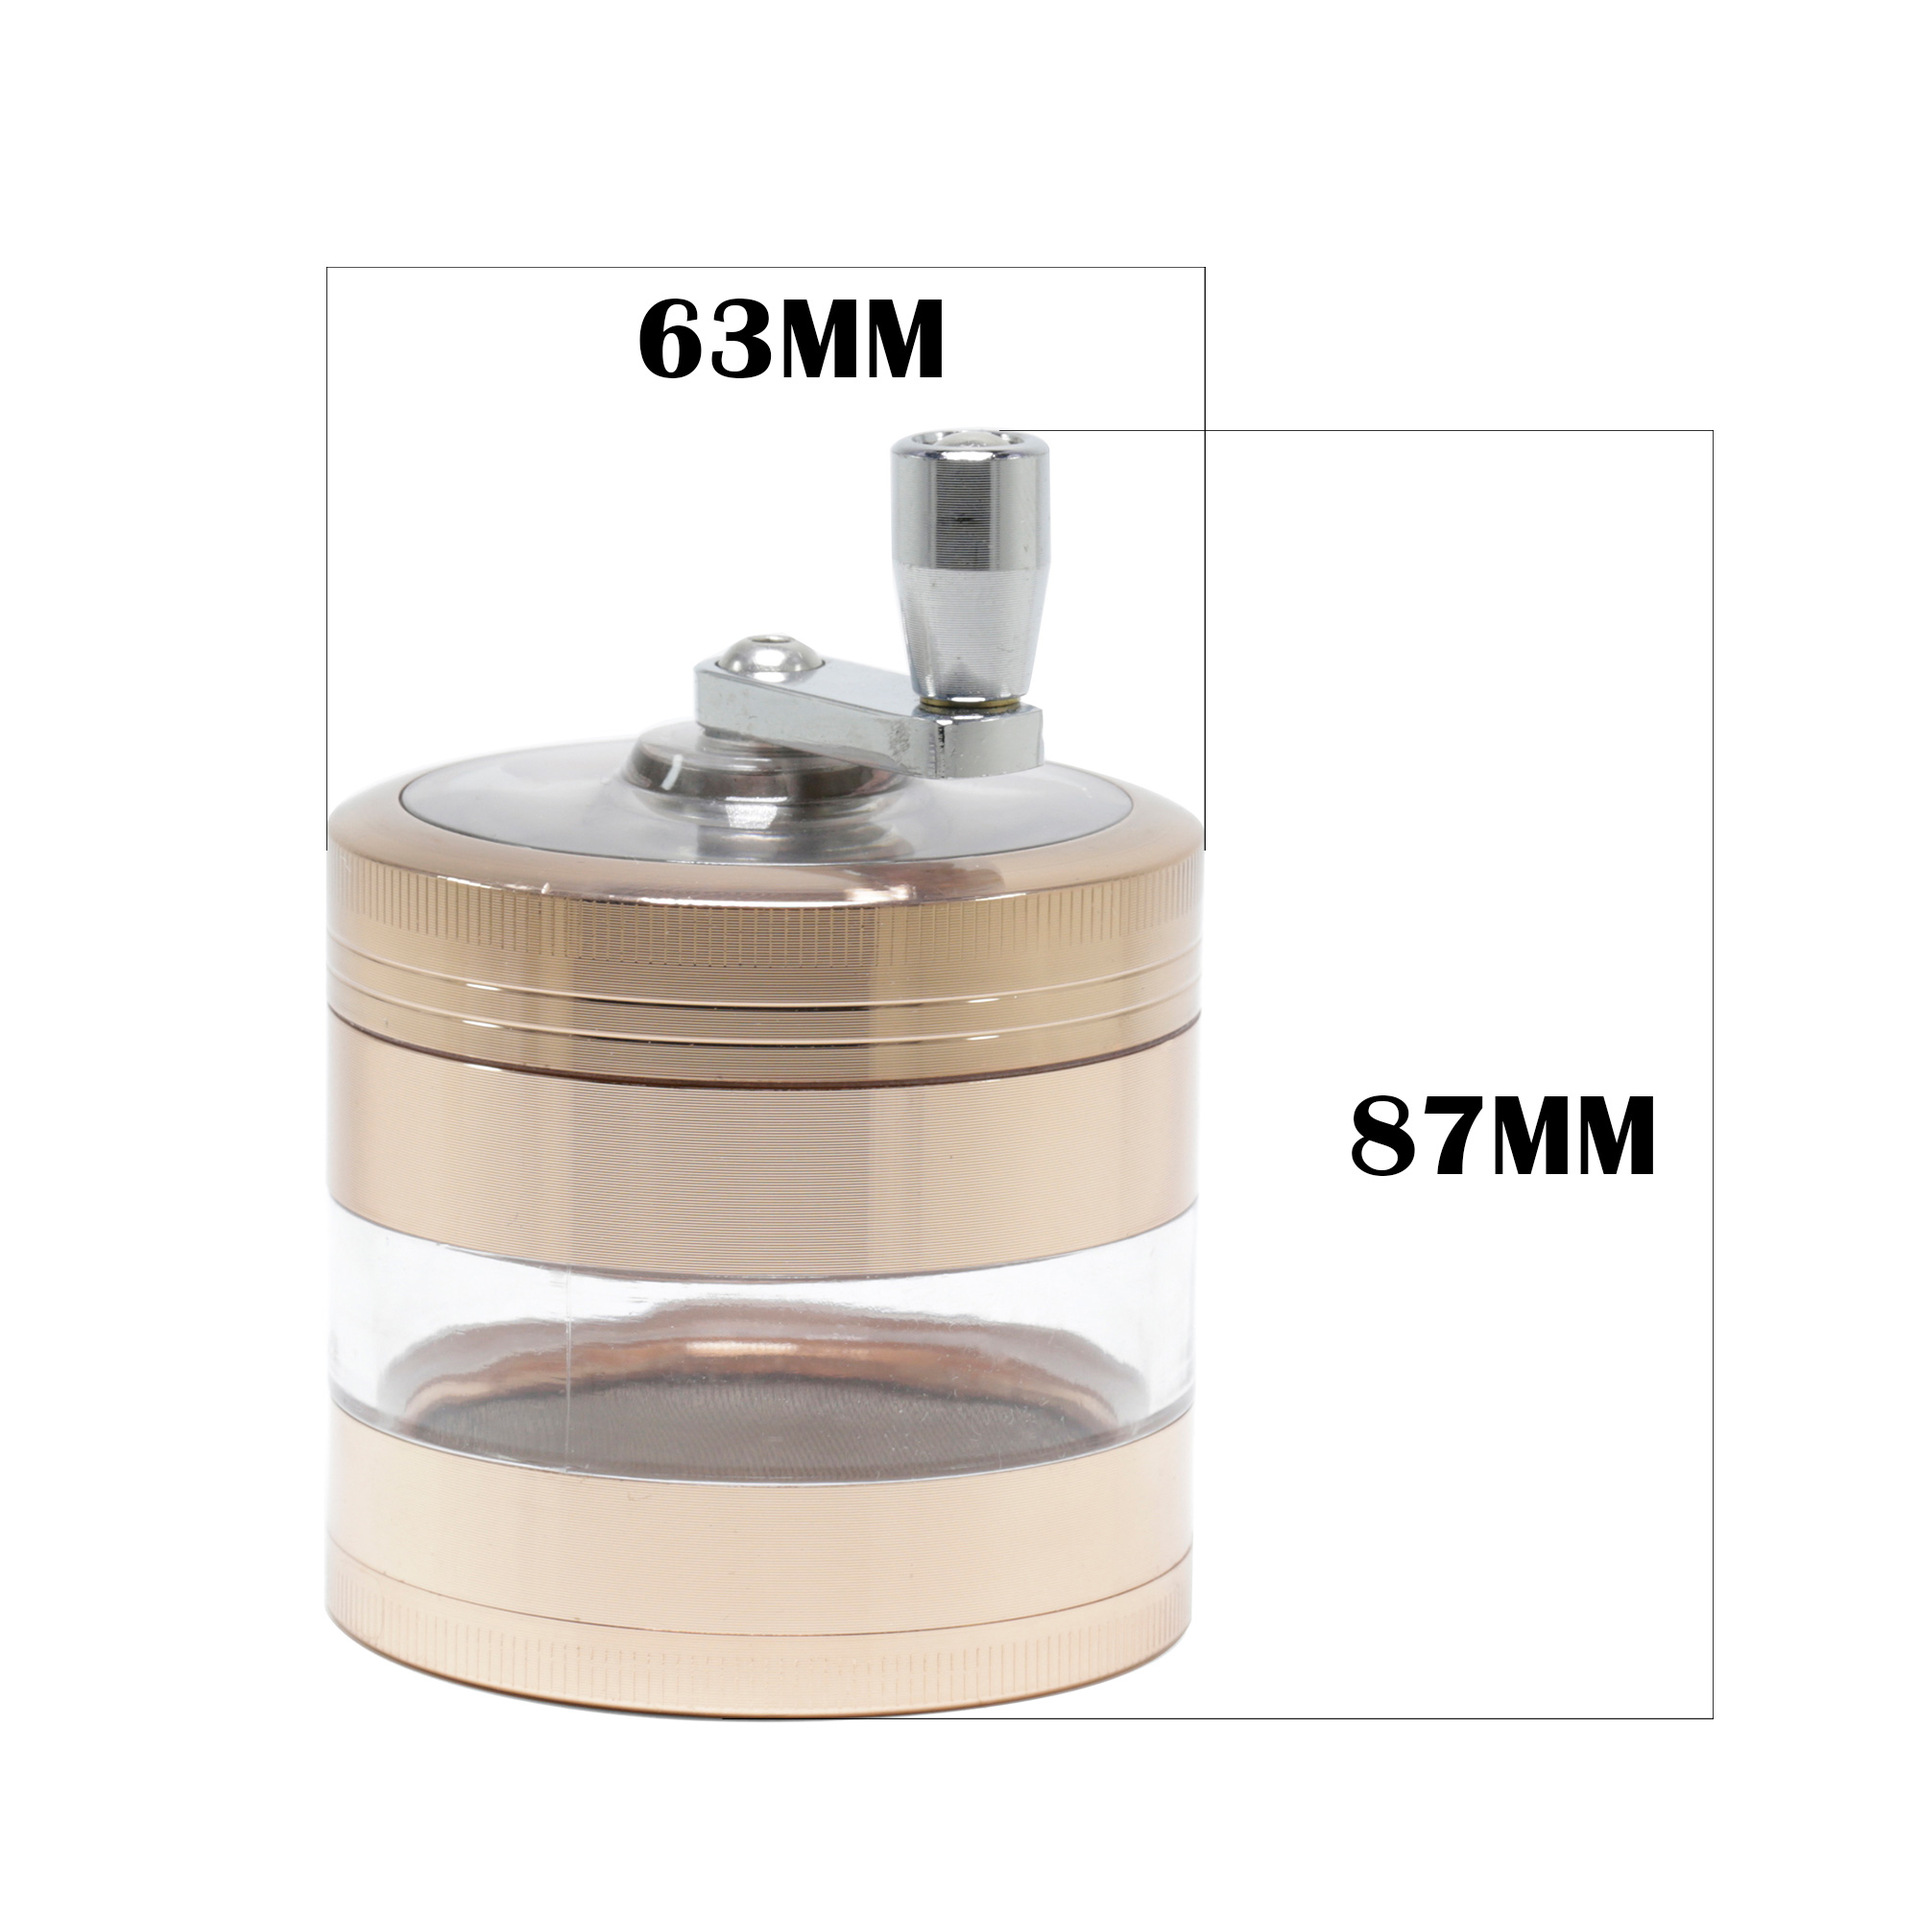 SMALL 4 LAYER ZINC ALLOY TOBACCO GRINDER HIGH QUALITY SMOKE GRINDER Featured Image